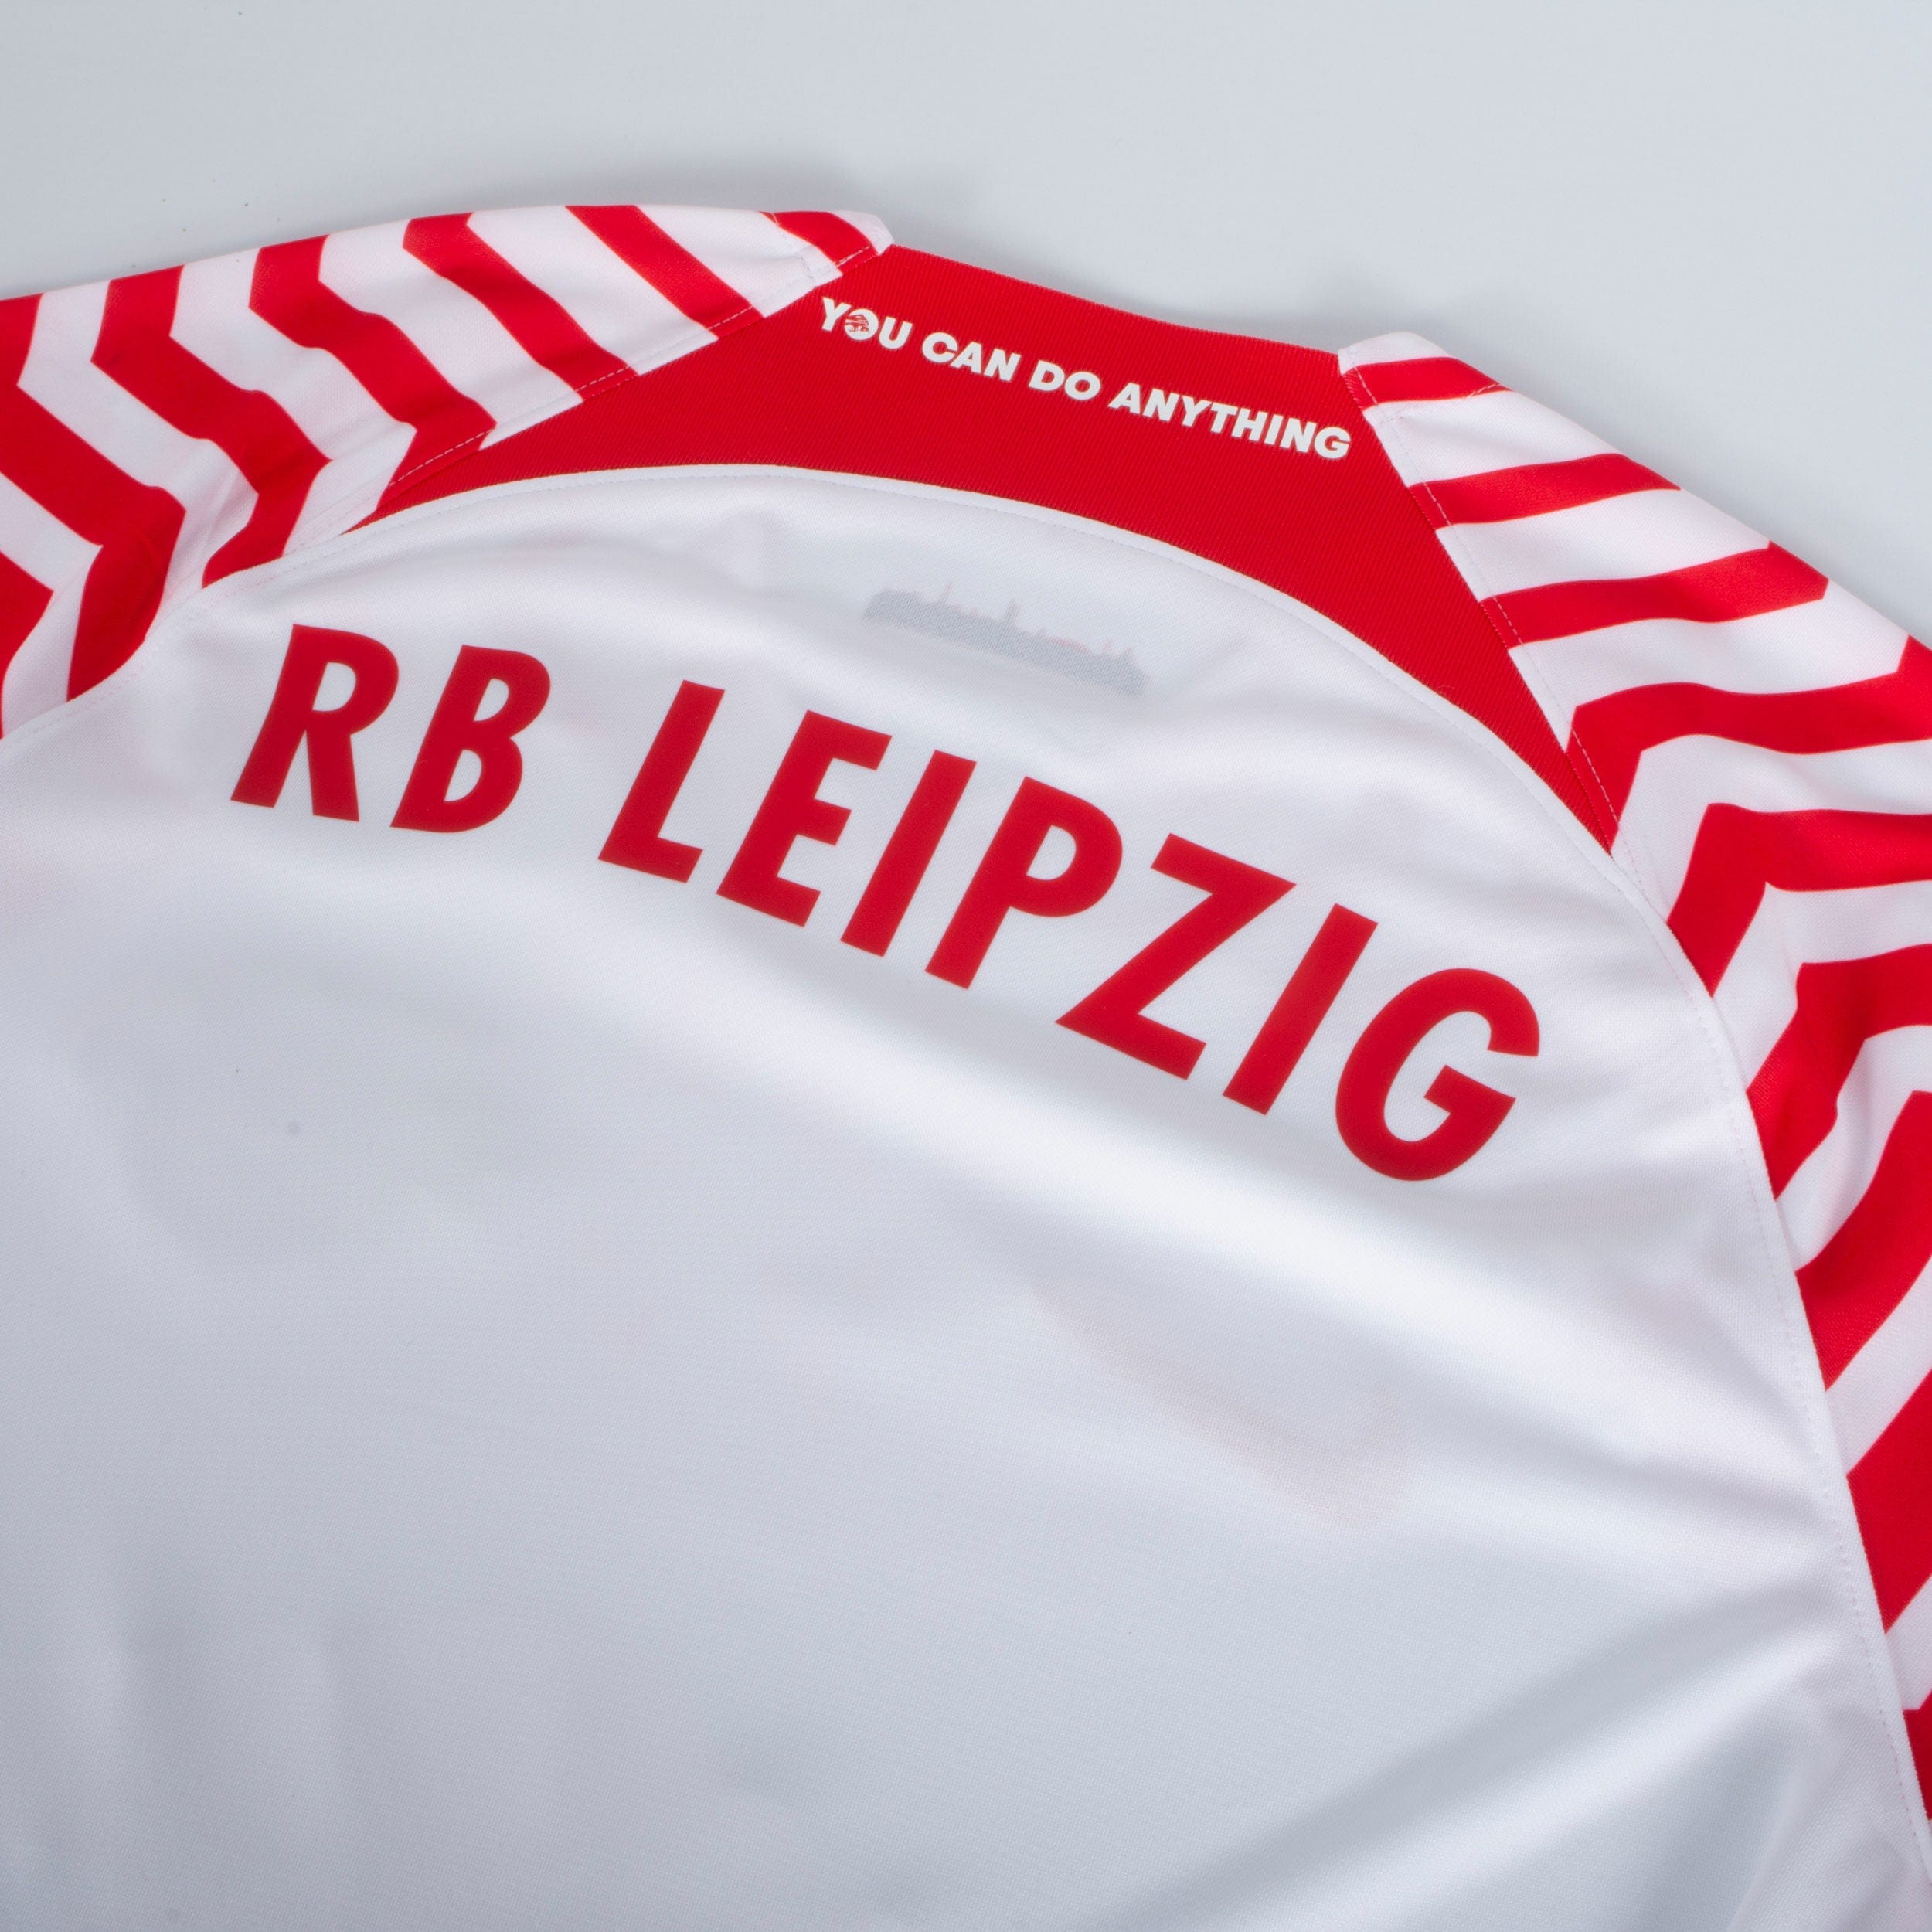 RB Leipzig 2023/2024 Home Jersey - Show Support